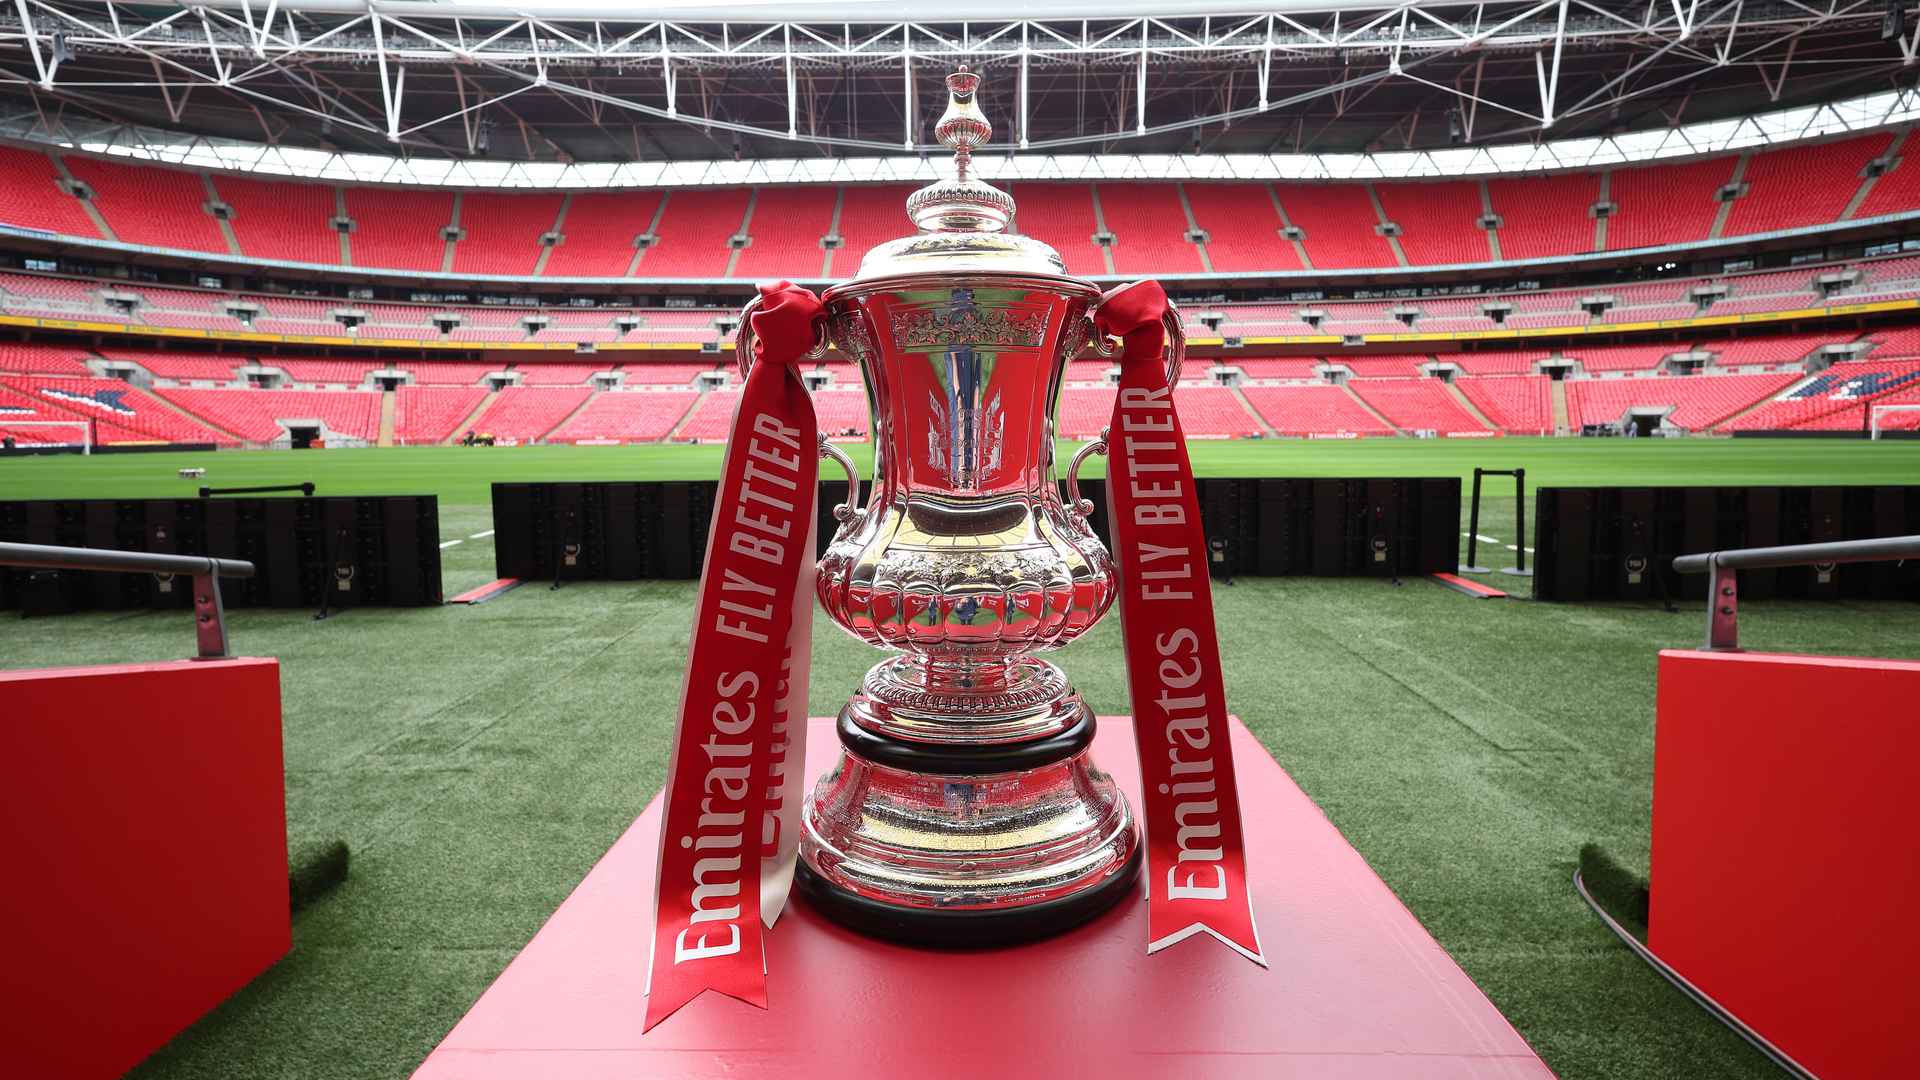 Preview The Emirates FA Cup final Manchester United